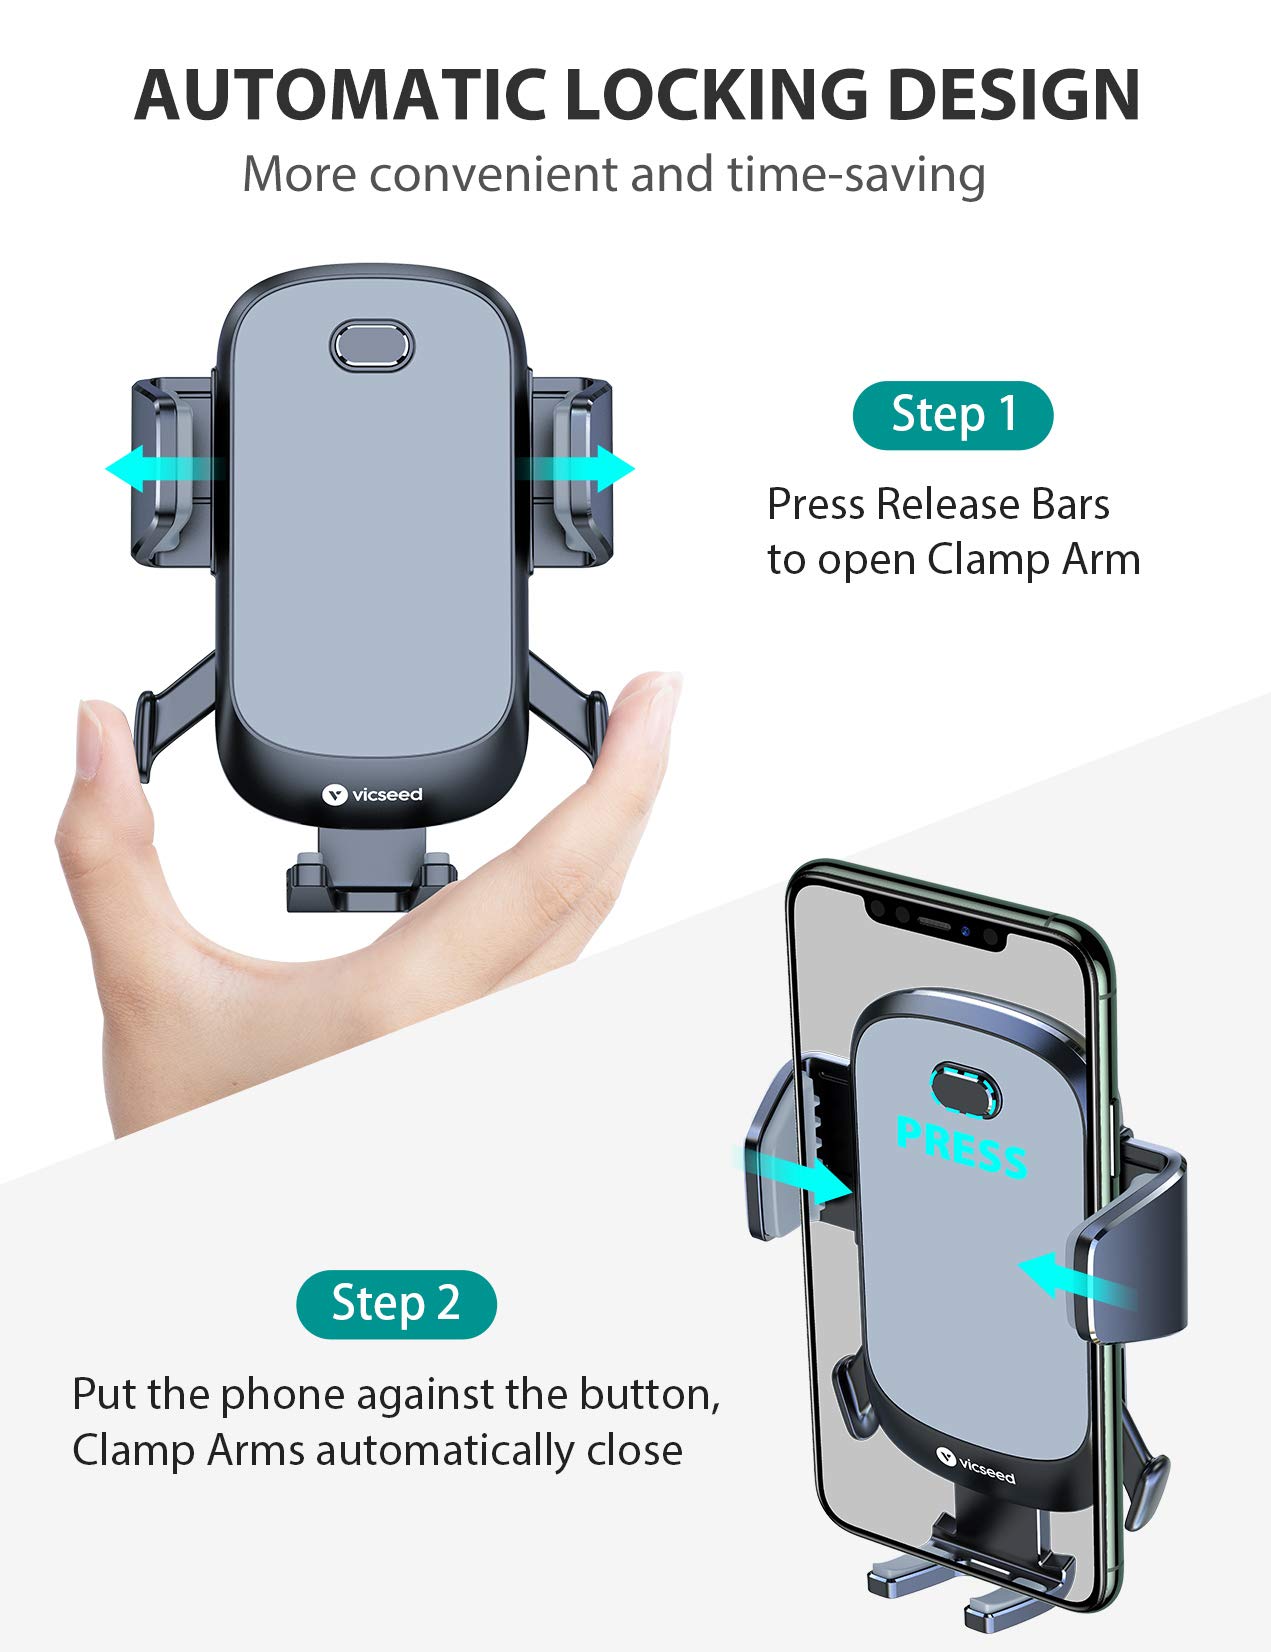 2022 Upgraded Auto Clamp Cell Phone Holder for Car, VICSEED Car Phone Holder Mount Ultra Stable Car Phone Mount Strong Grip Air Vent Phone Car Holder Case Friendly Fit for iPhone 12 and All Smartphone